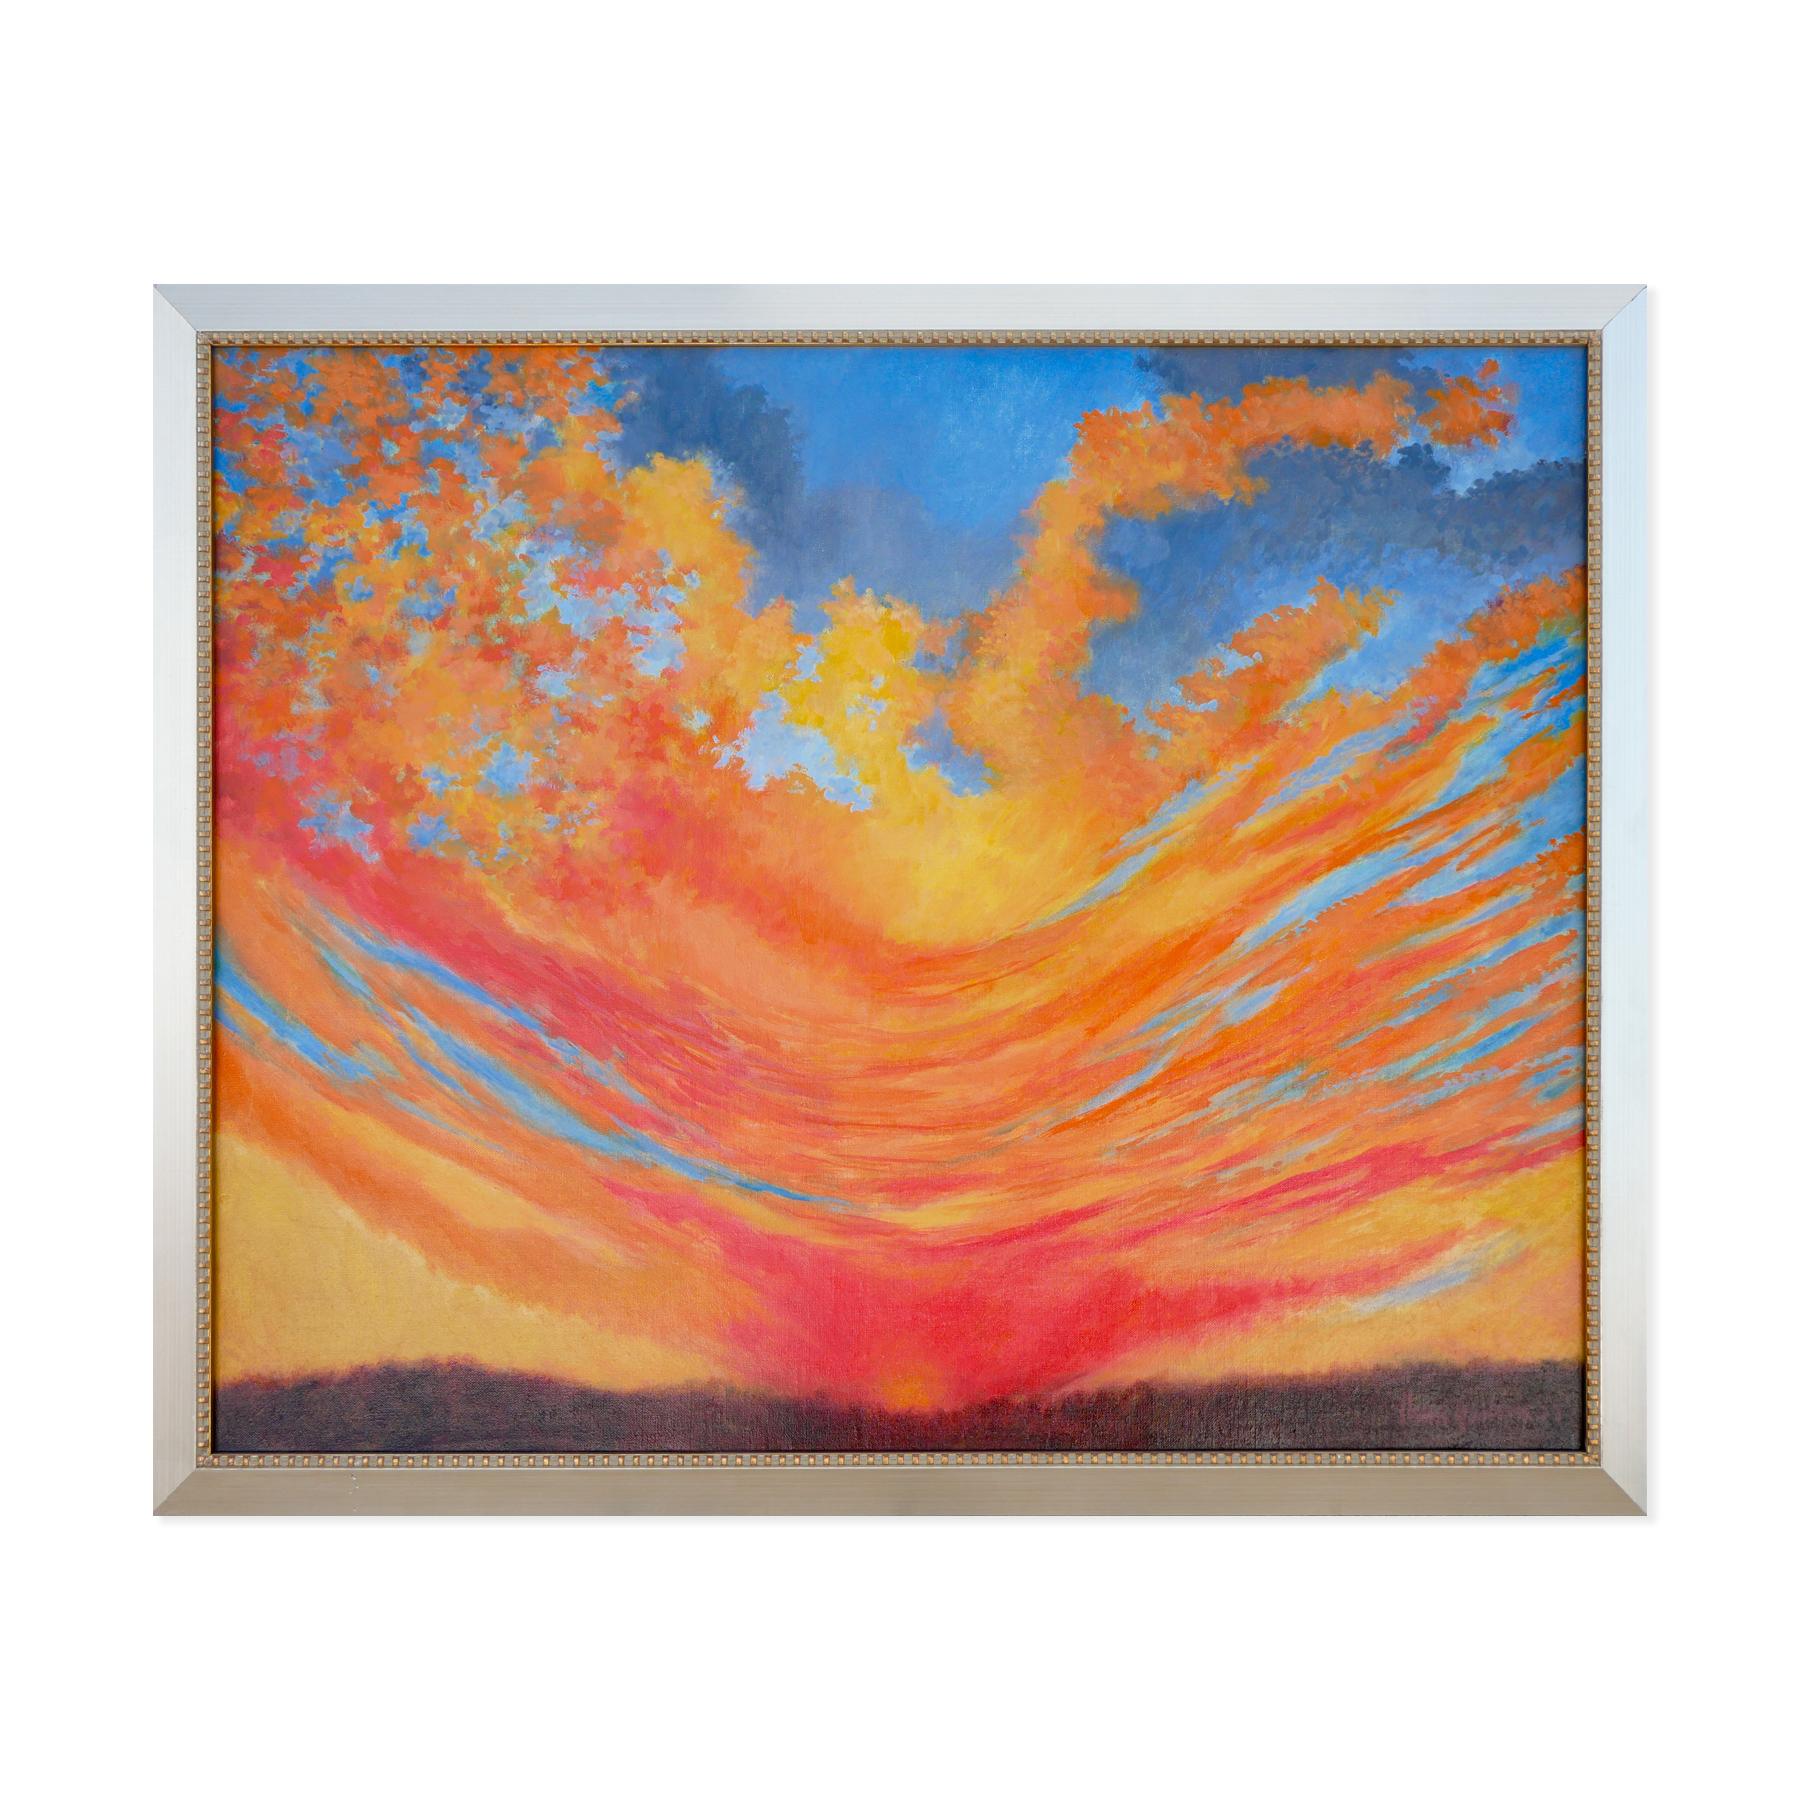 Blue, Orange, and Yellow Abstract Expressionist Sunset Landscape - Print by Henri Gadbois